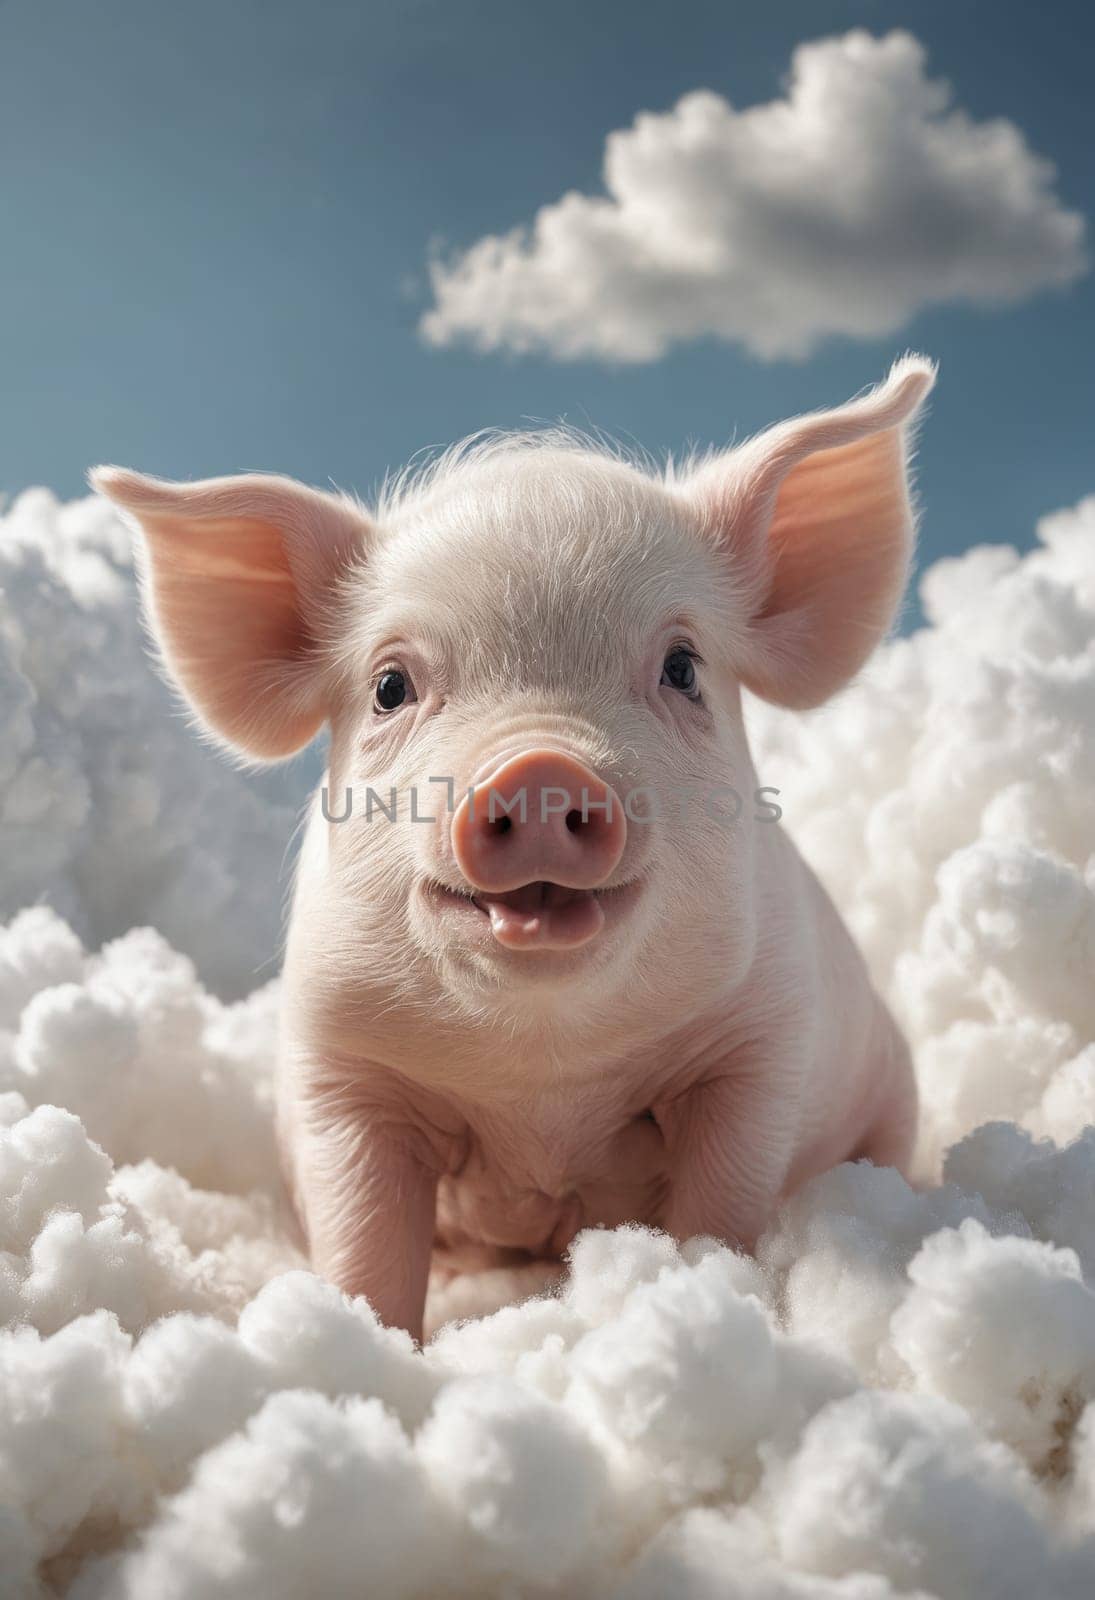 Country Charm – Adorable Piglet Enjoying the Farm Life by Andre1ns